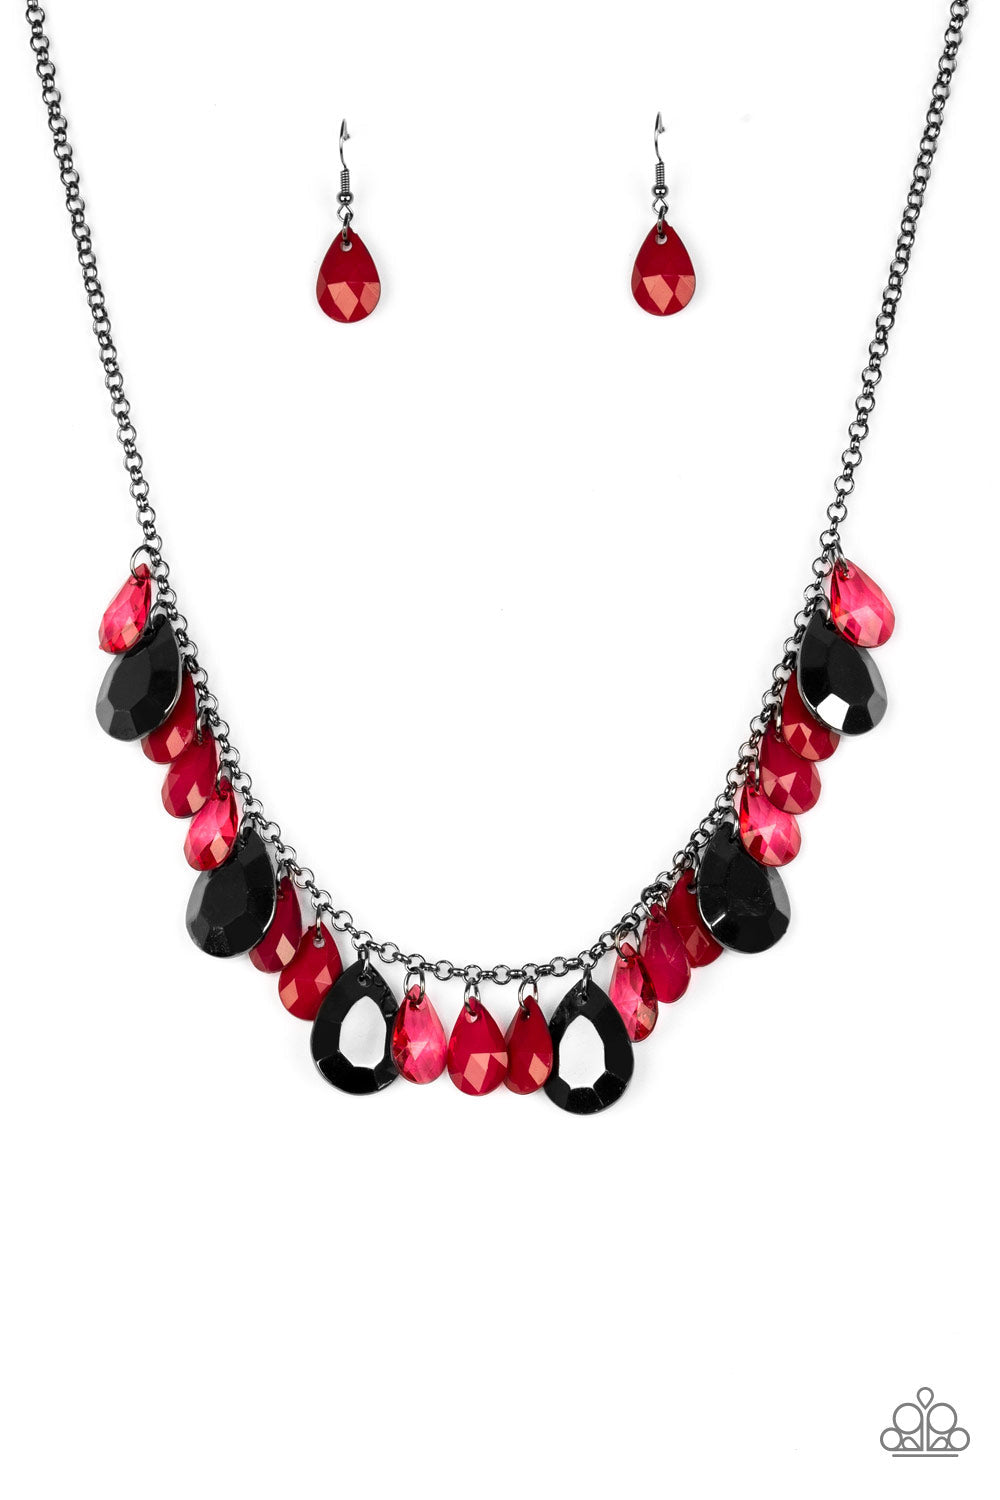 Hurricane Season - Red and Gunmetal Necklace - Paparazzi Accessories - Tinted in the robust shade of Wine, glassy and polished red teardrops drip from the bottom of a shimmery gunmetal chain. Faceted gunmetal teardrops trickle between the colorful beading, adding a flashy finish to the flirtatious fringe. Features an adjustable clasp closure.